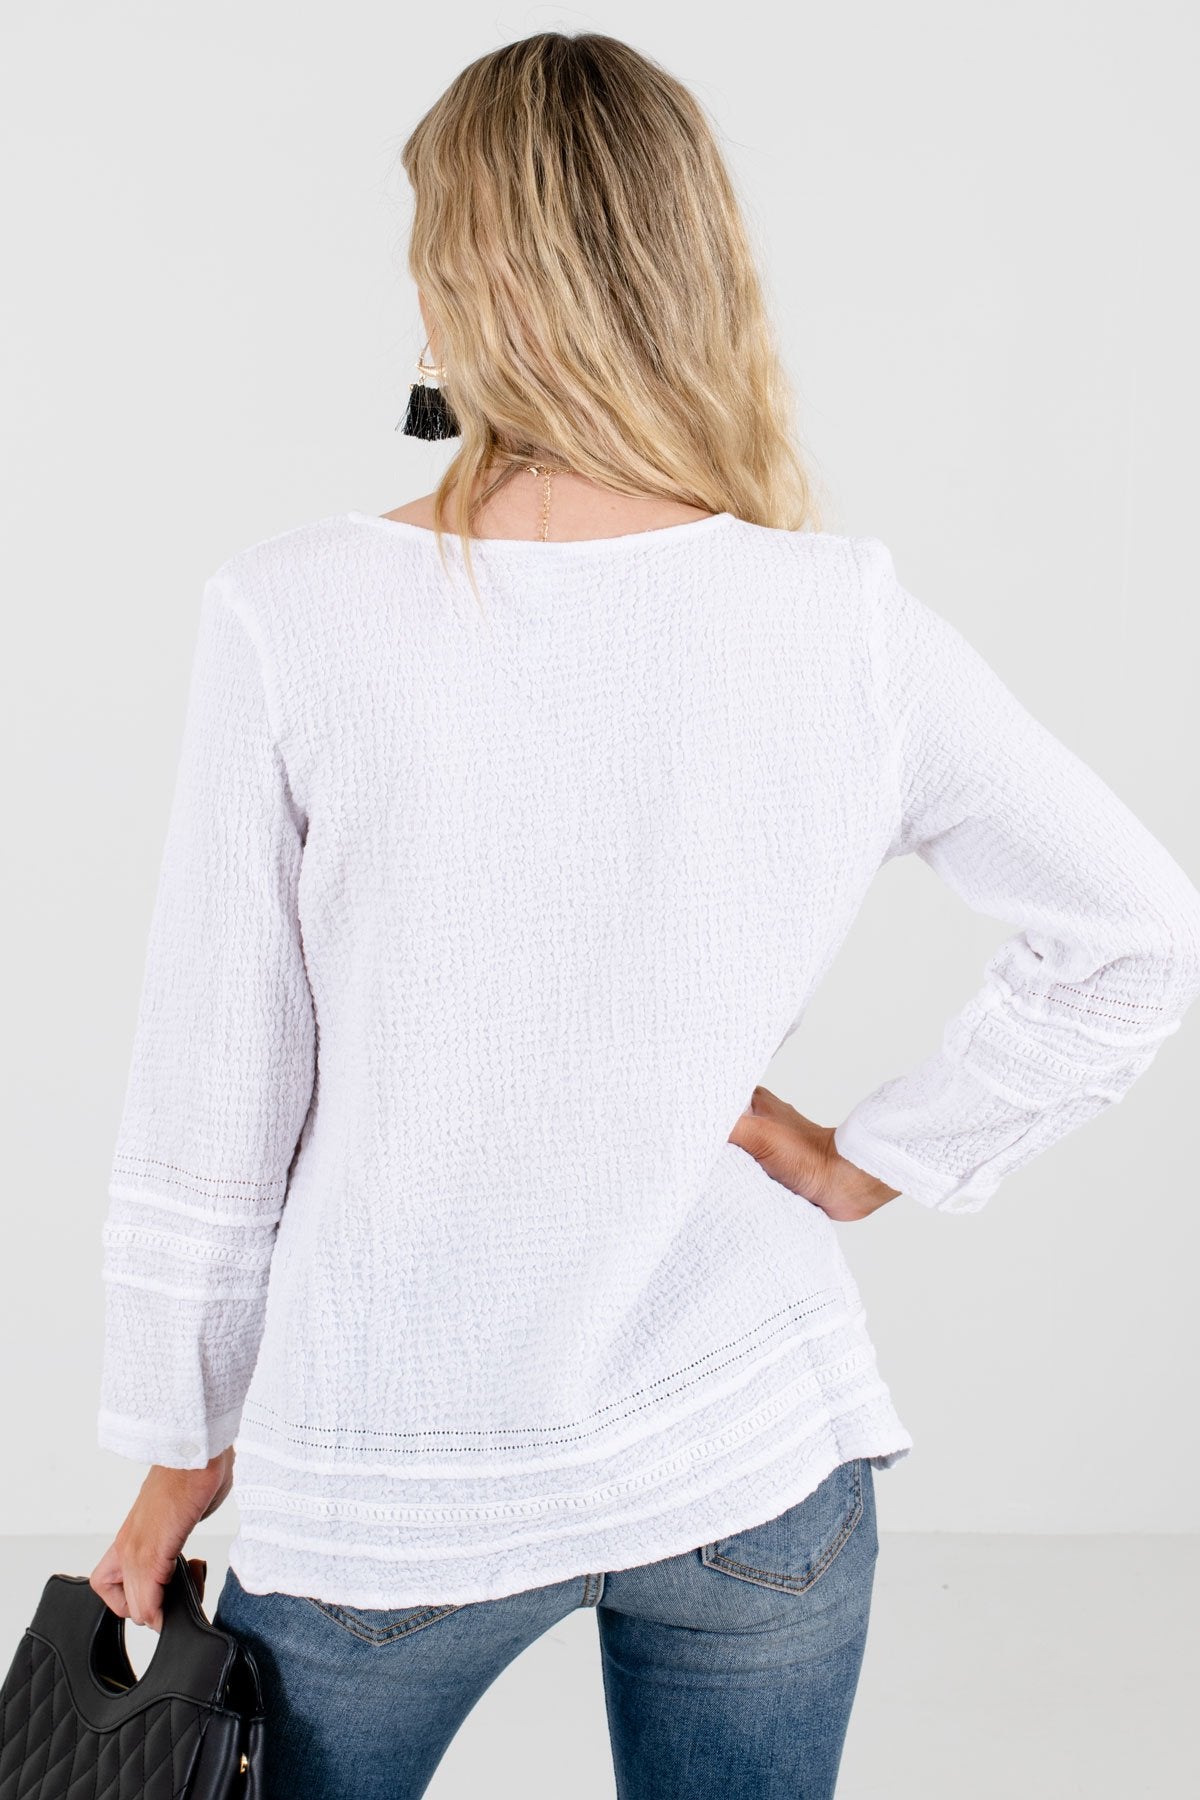 Women's White Crochet and Ladder Lace Detailed Boutique Tops